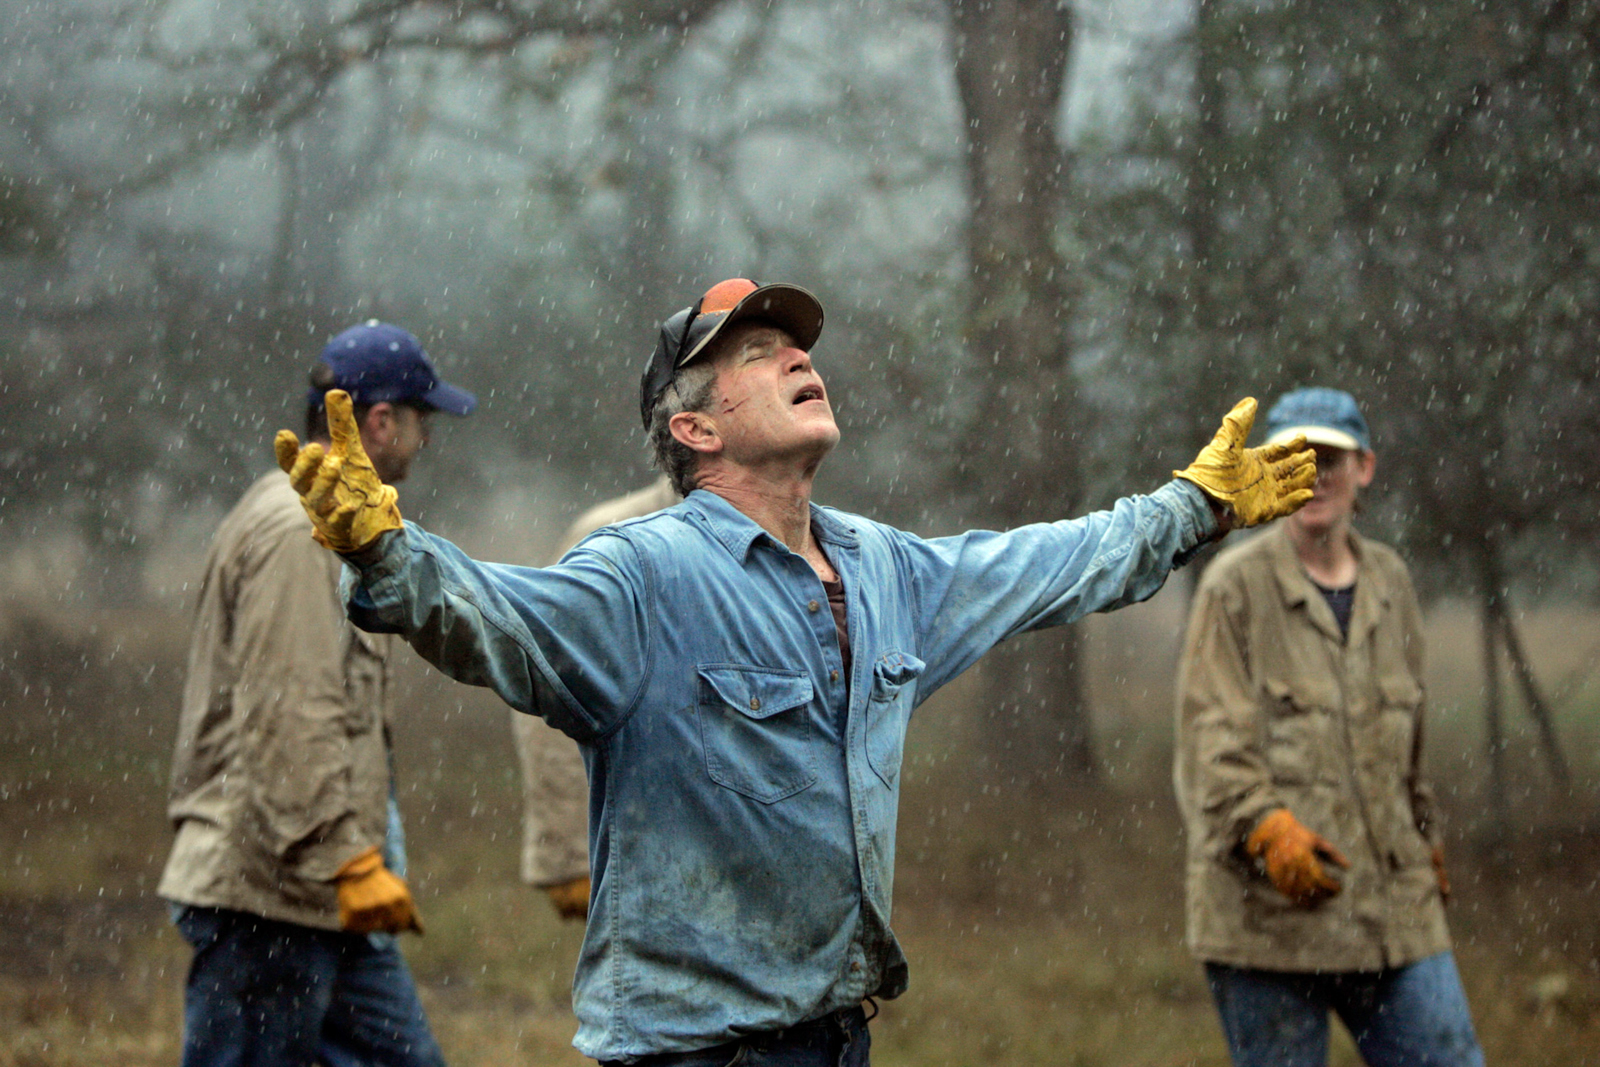 President Bush: Brush clearing and burning with staff. Ranch, Crawford, Texas. The President holds his arms out in the rain.